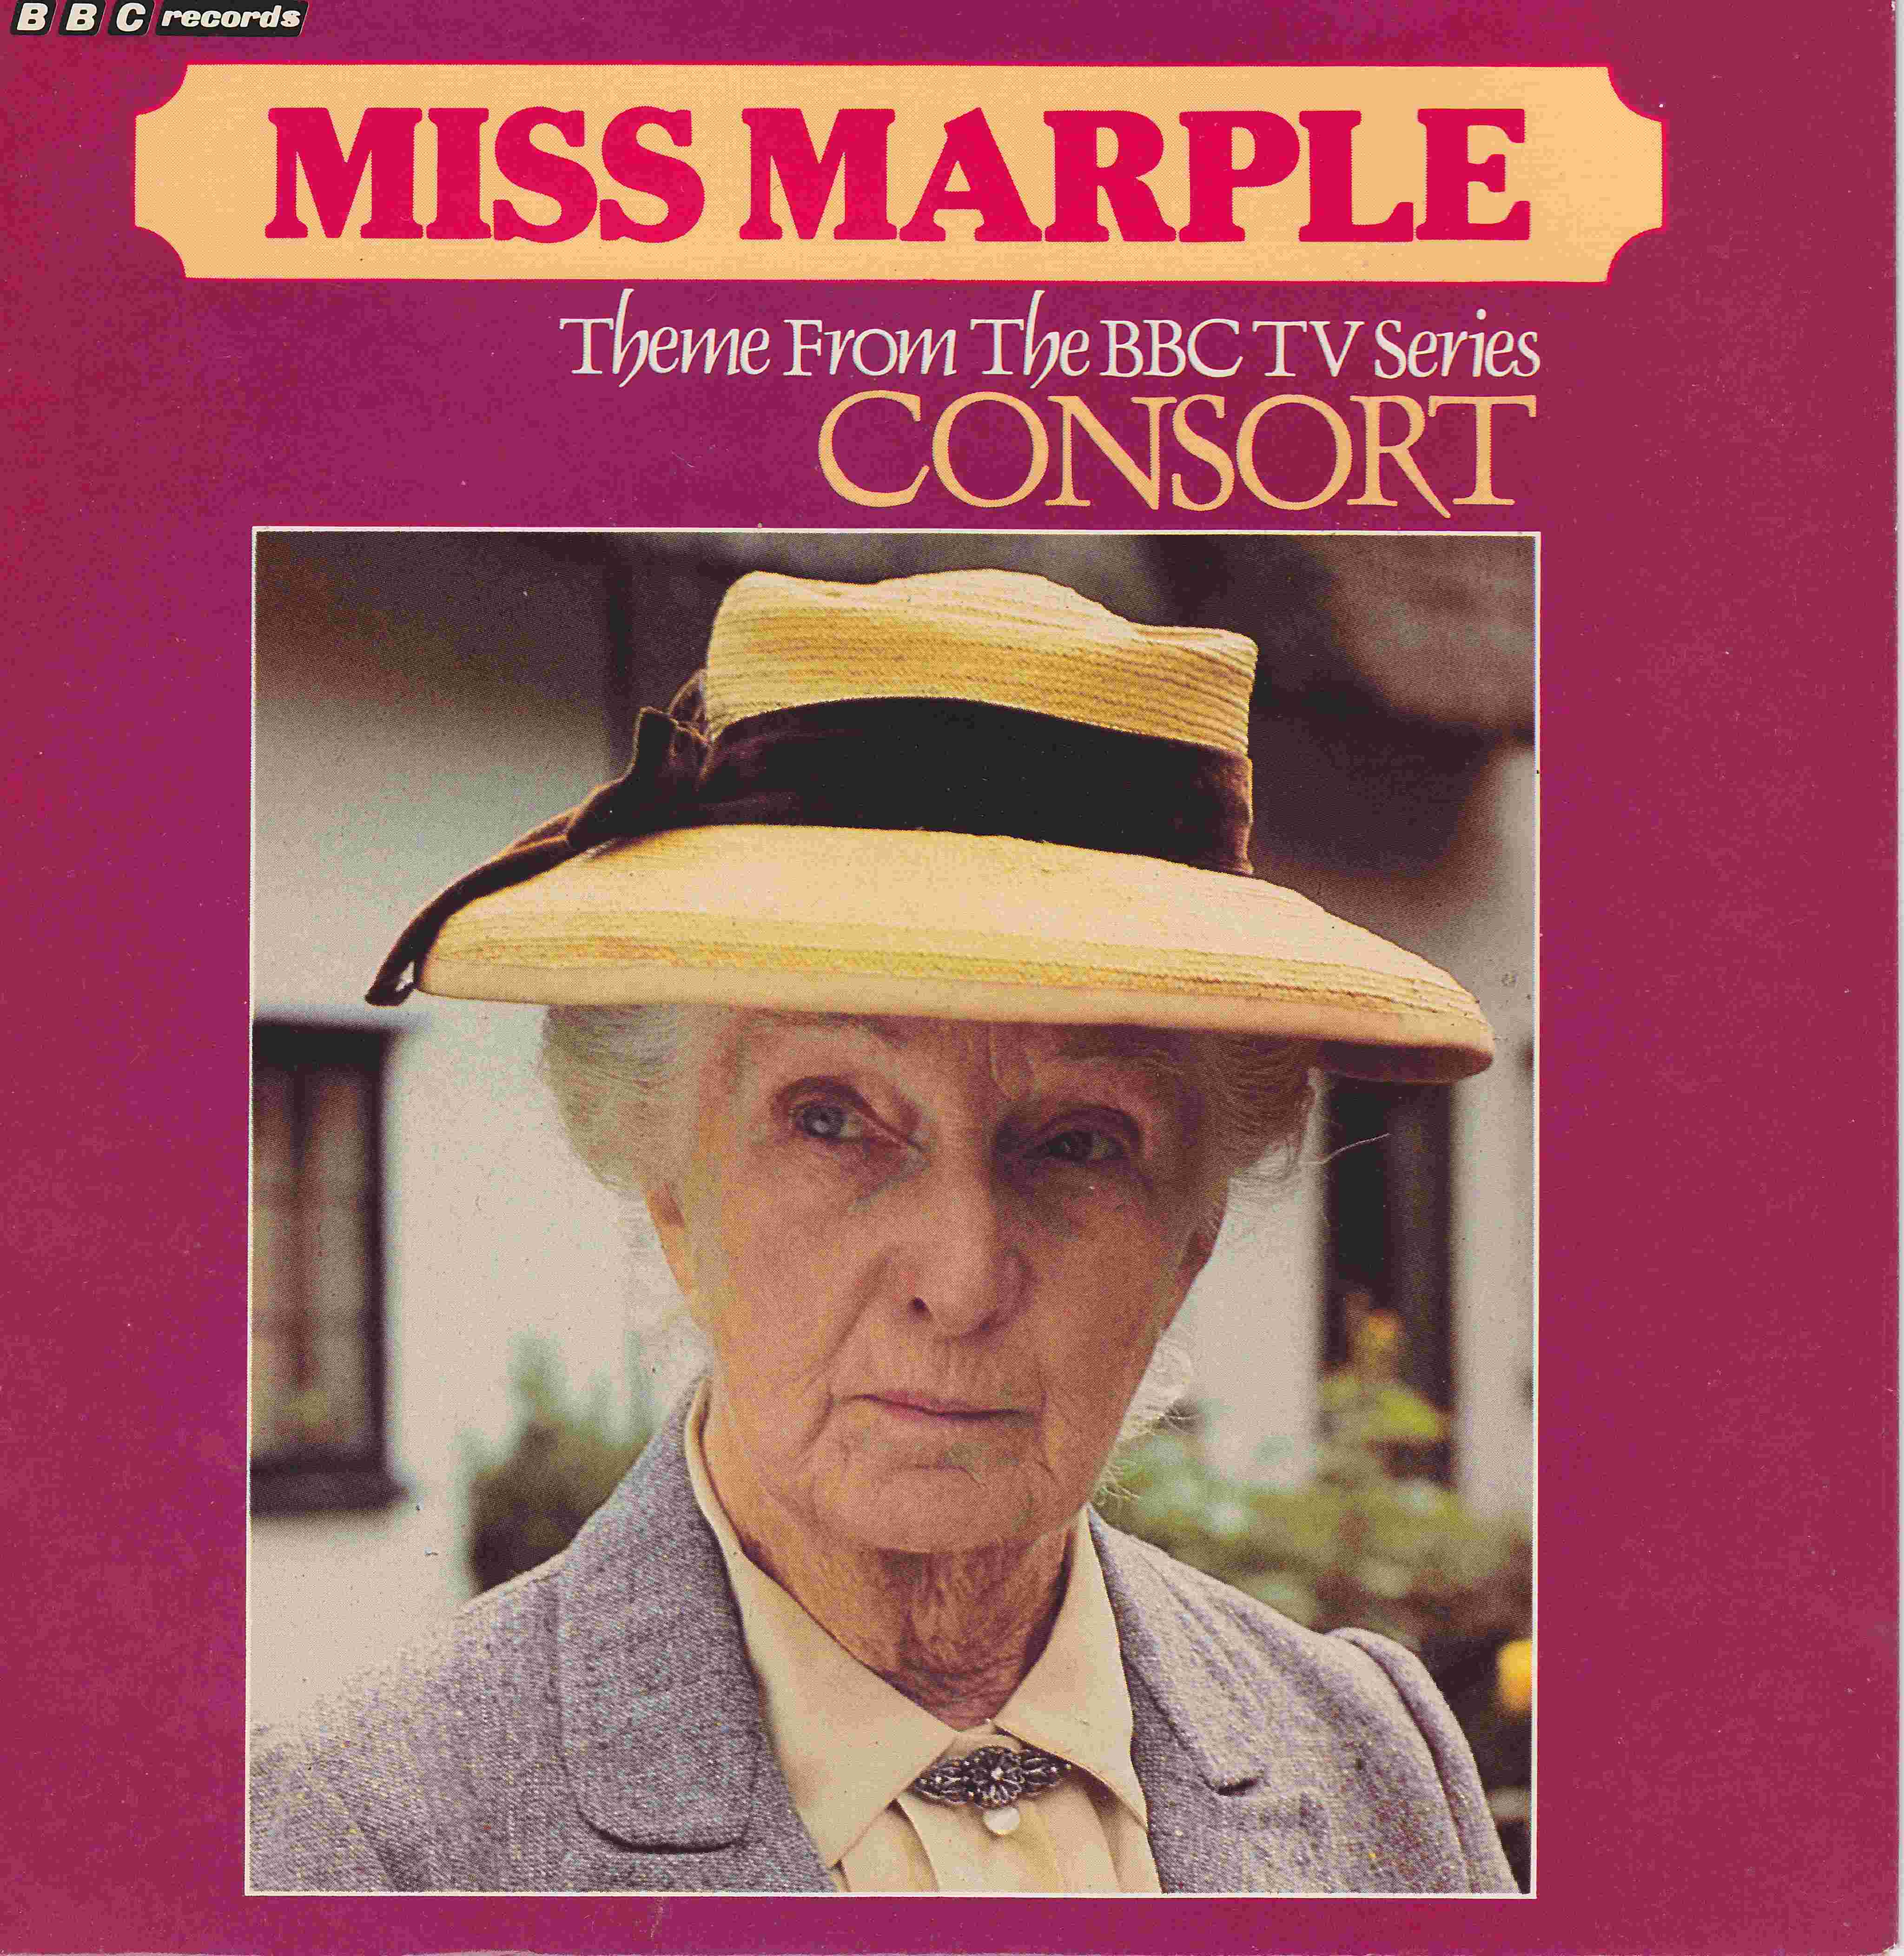 Picture of RESL 153 Miss Marple by artist Ken Howard / Alan Blaikley / John Altman / Consort from the BBC singles - Records and Tapes library